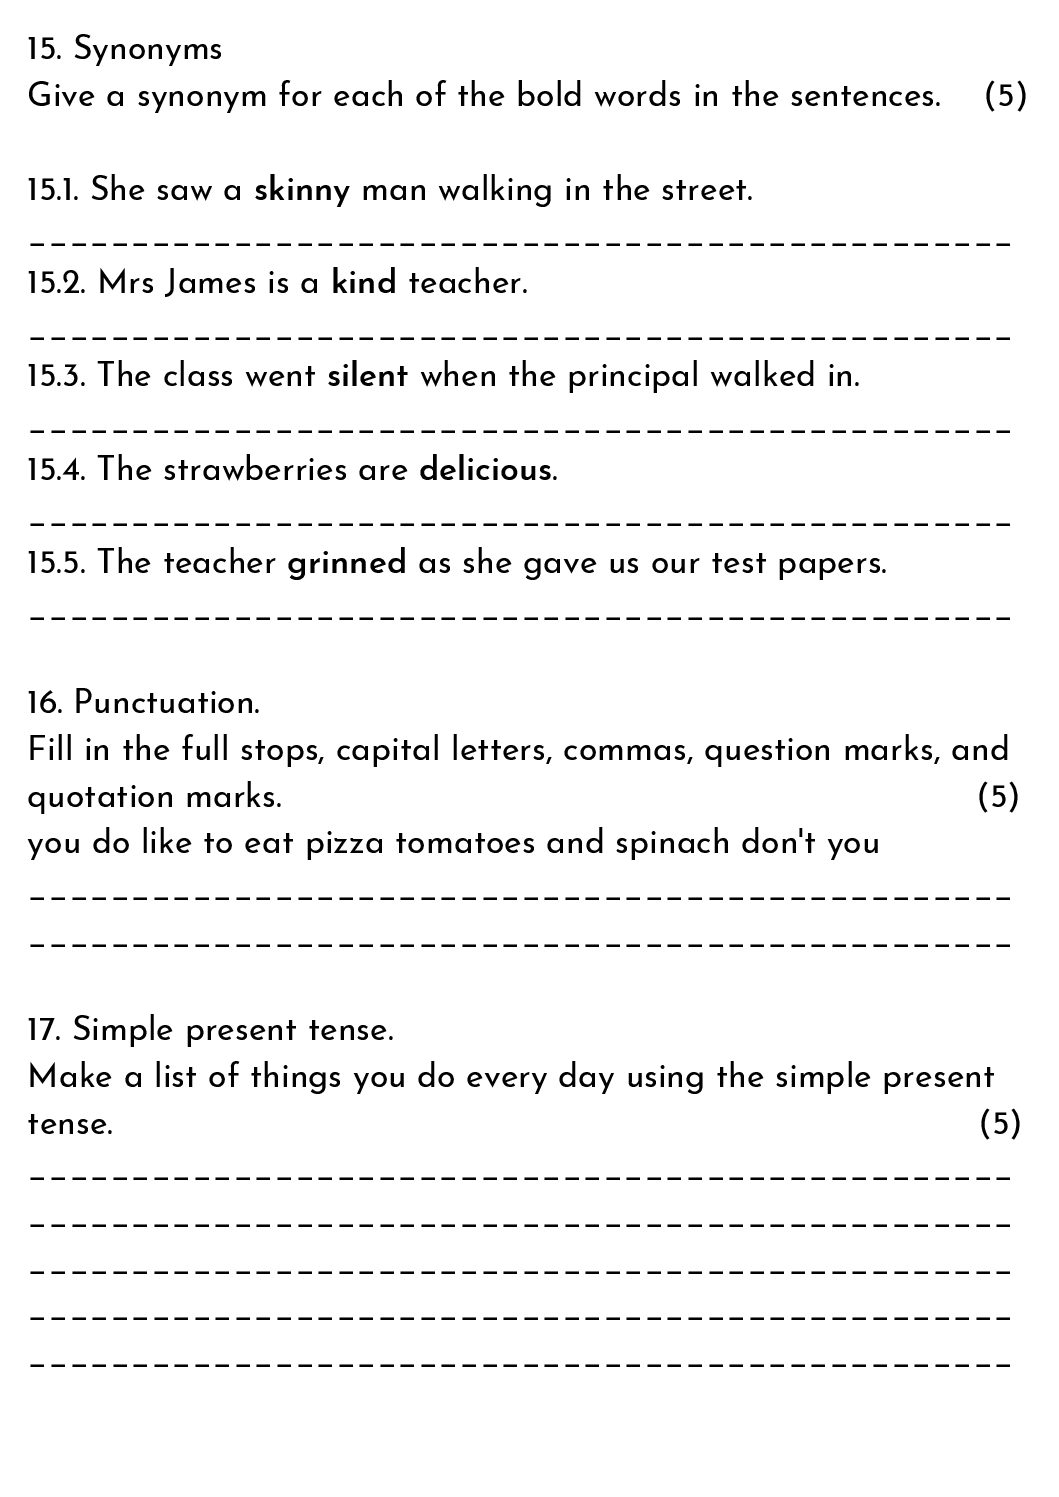 Grade 5 English Yearly Revision Assignment 20 10 1 Pdf 